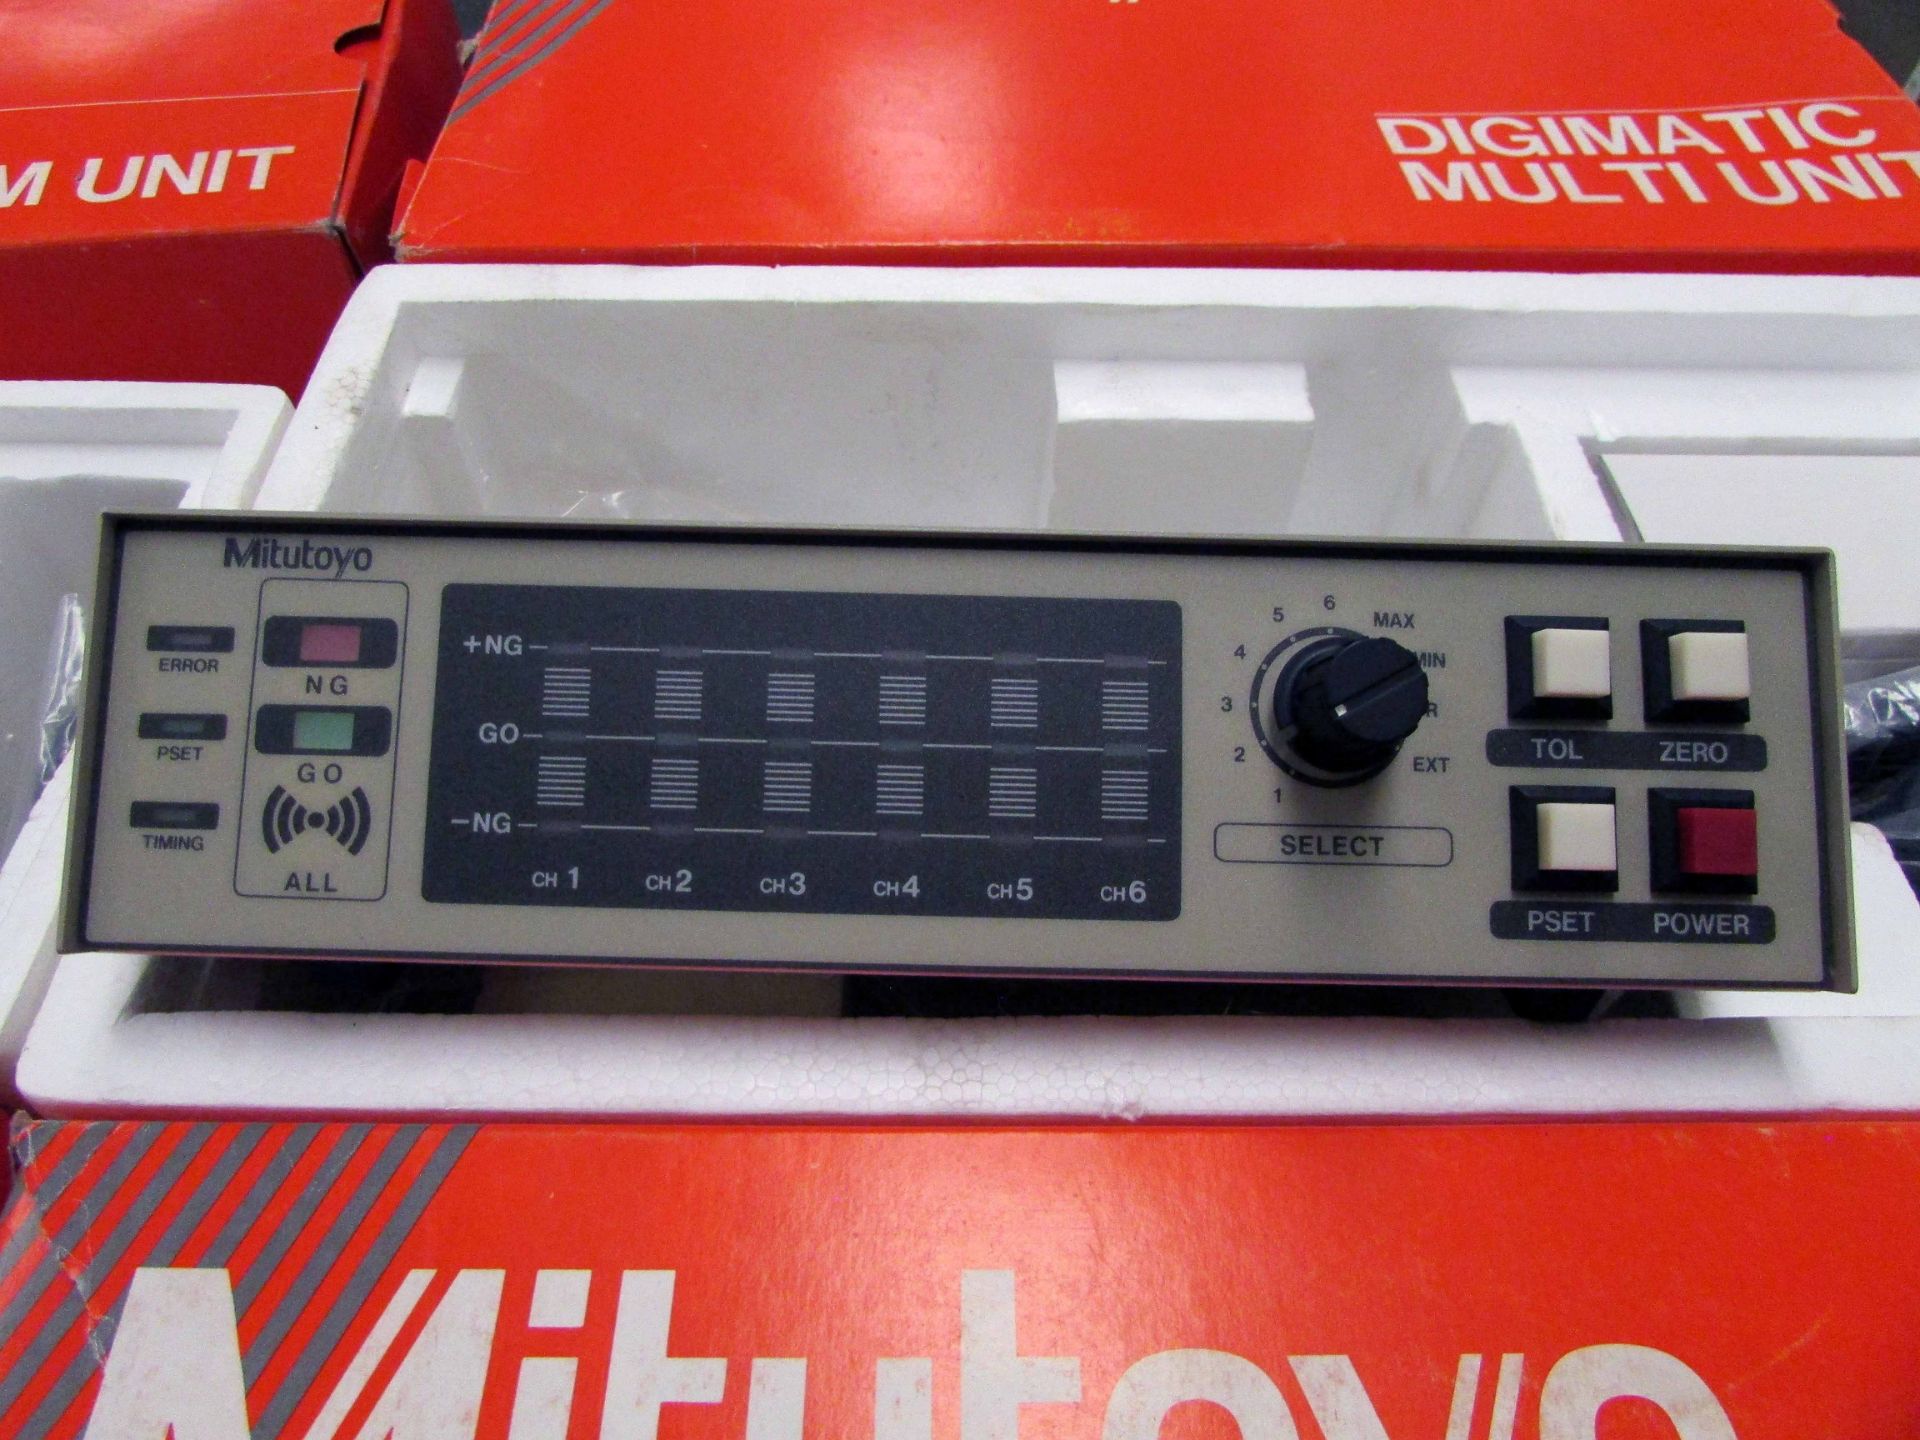 LOT OF DIGIMATIC MULTI UNIT, MITUTOYO MDL. SD-M1 (3), w/ (1) Mitutoyo SD-UI Digimatic difference/ - Image 4 of 5